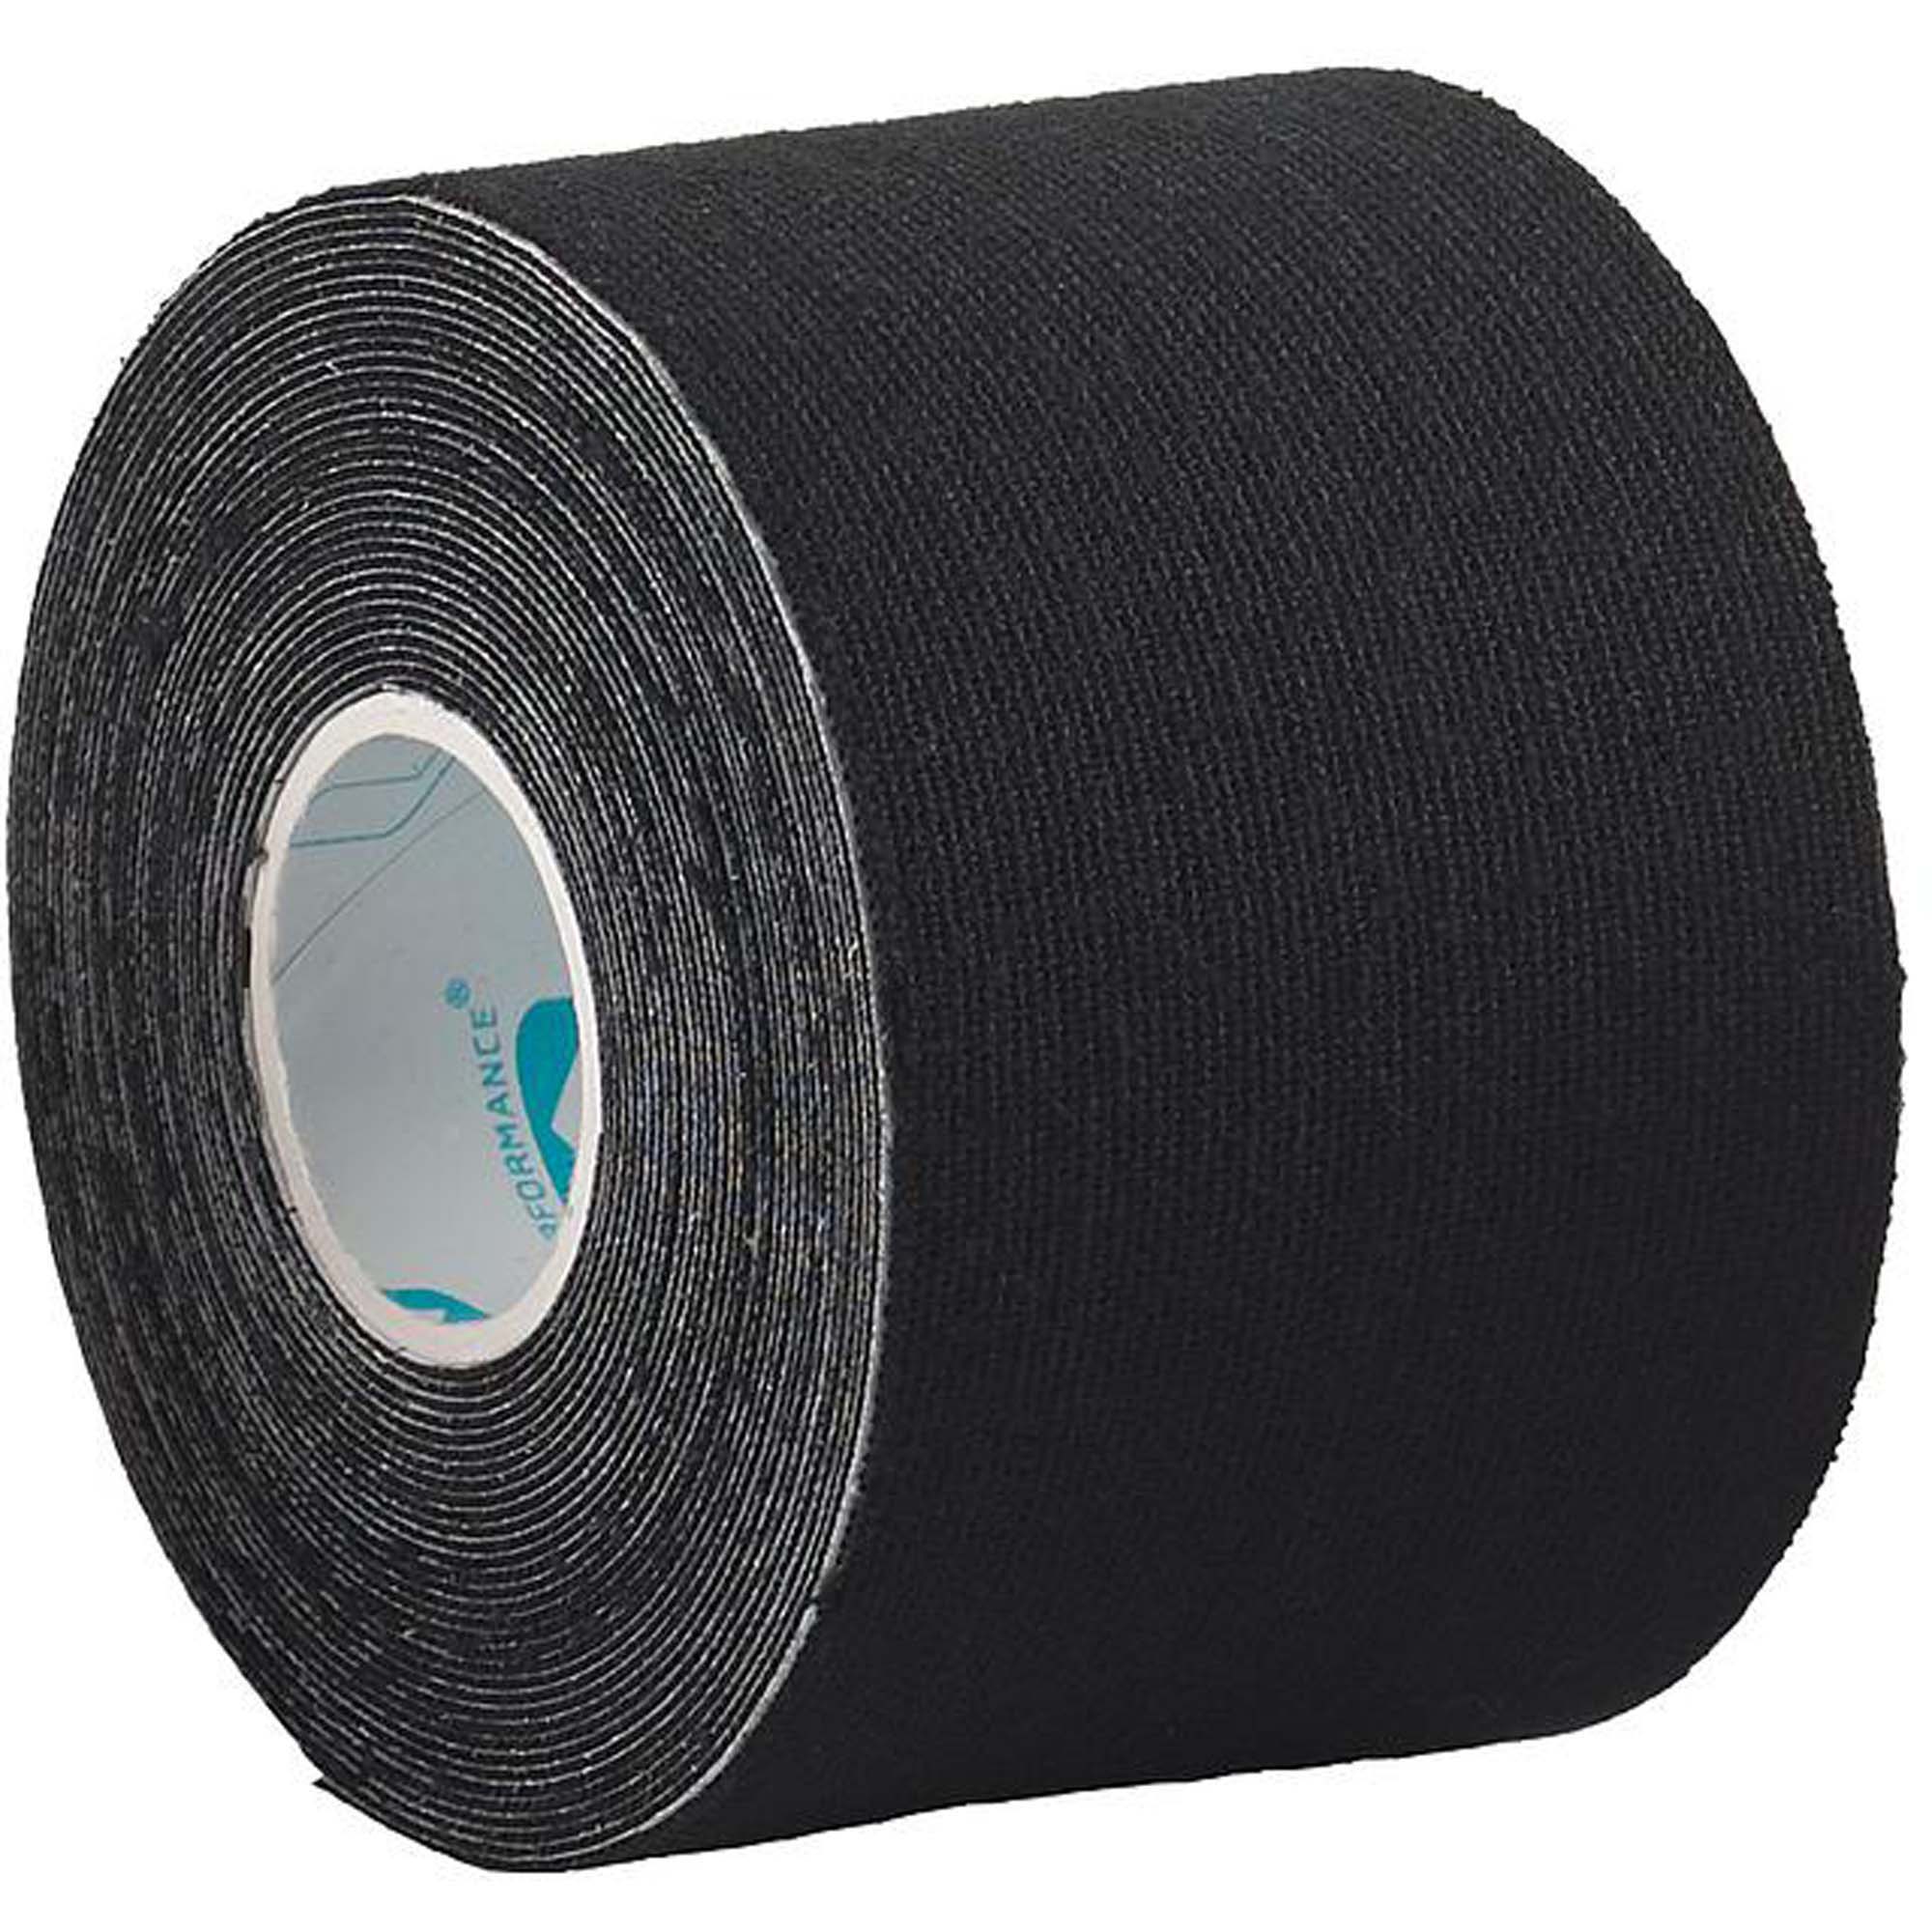 Photos - Other goods for tourism Ultimate Performance Kinesiology Tape Roll Joint+Muscle Support Black UP00